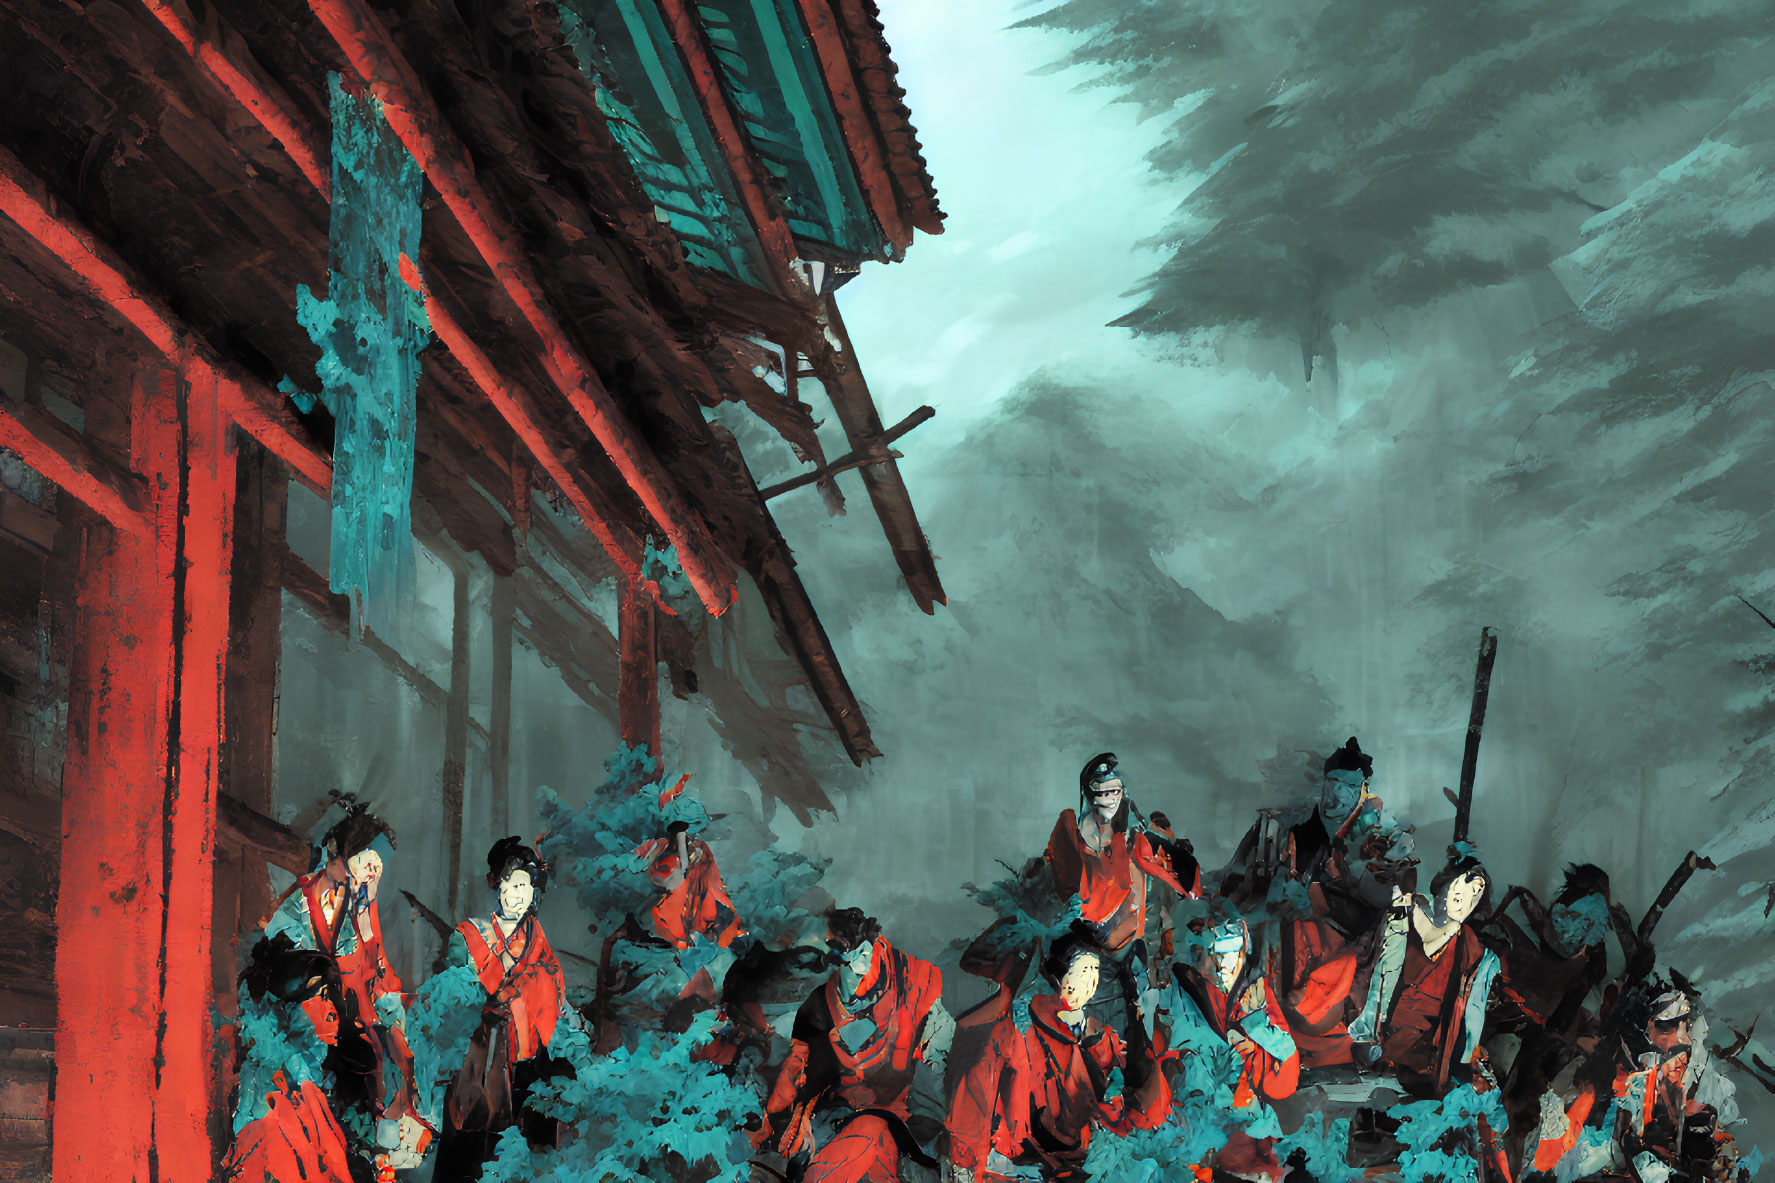 Asian warriors in red armor gather under ancient wooden building in misty forest